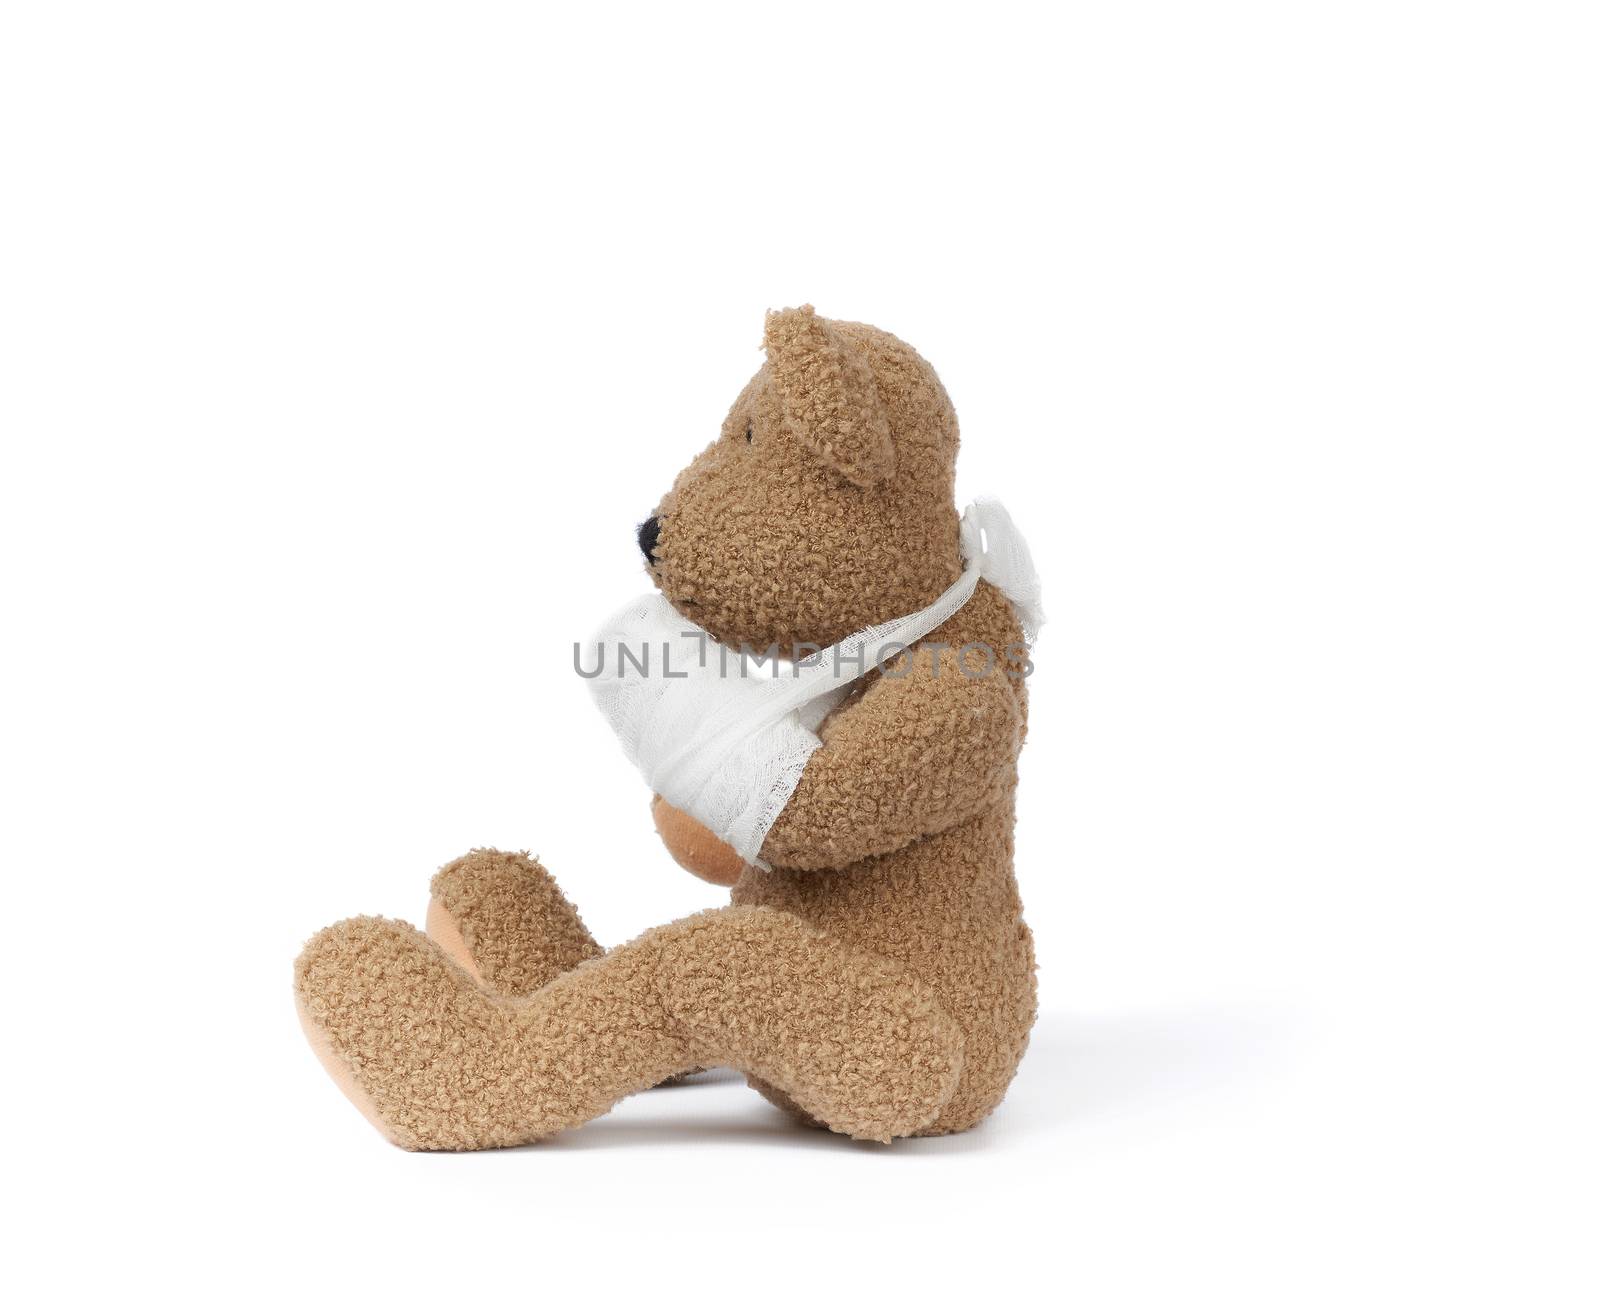 funny vintage brown curly teddy bear with rewound paw with white gauze bandage isolated on white background, concept of injuries in children or animals